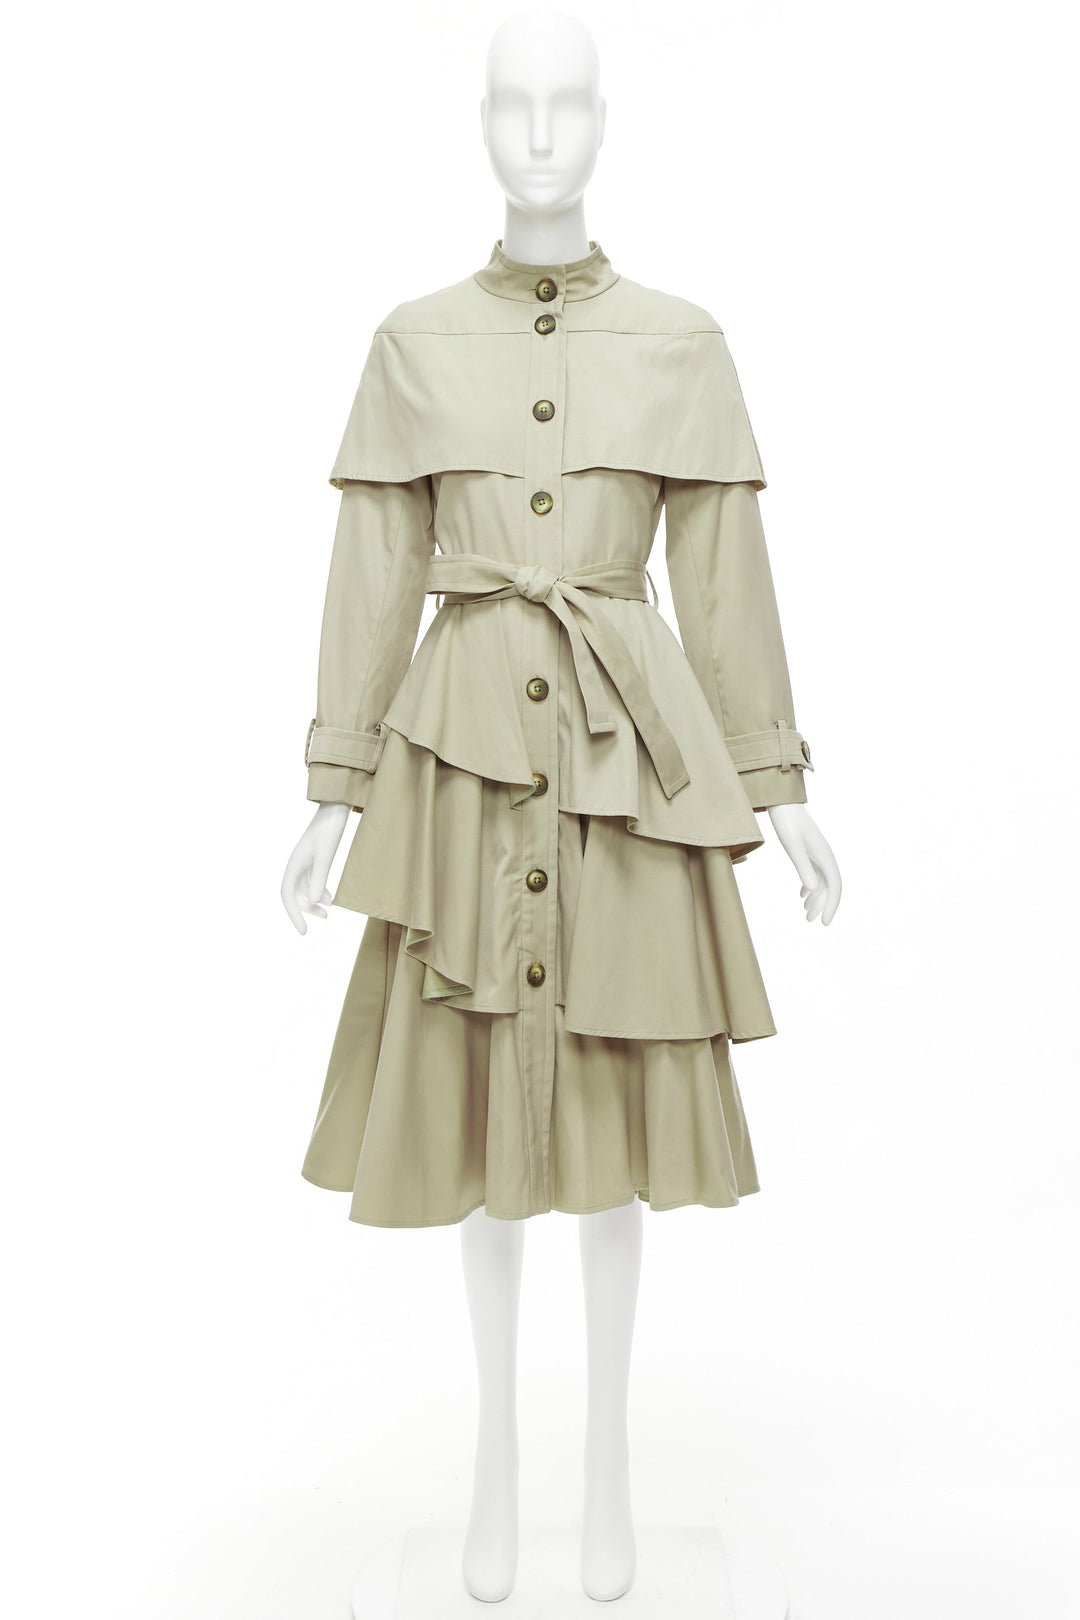 OSMAN LONDON khaki cotton tiered ruffle capelet belted long trench coat XS